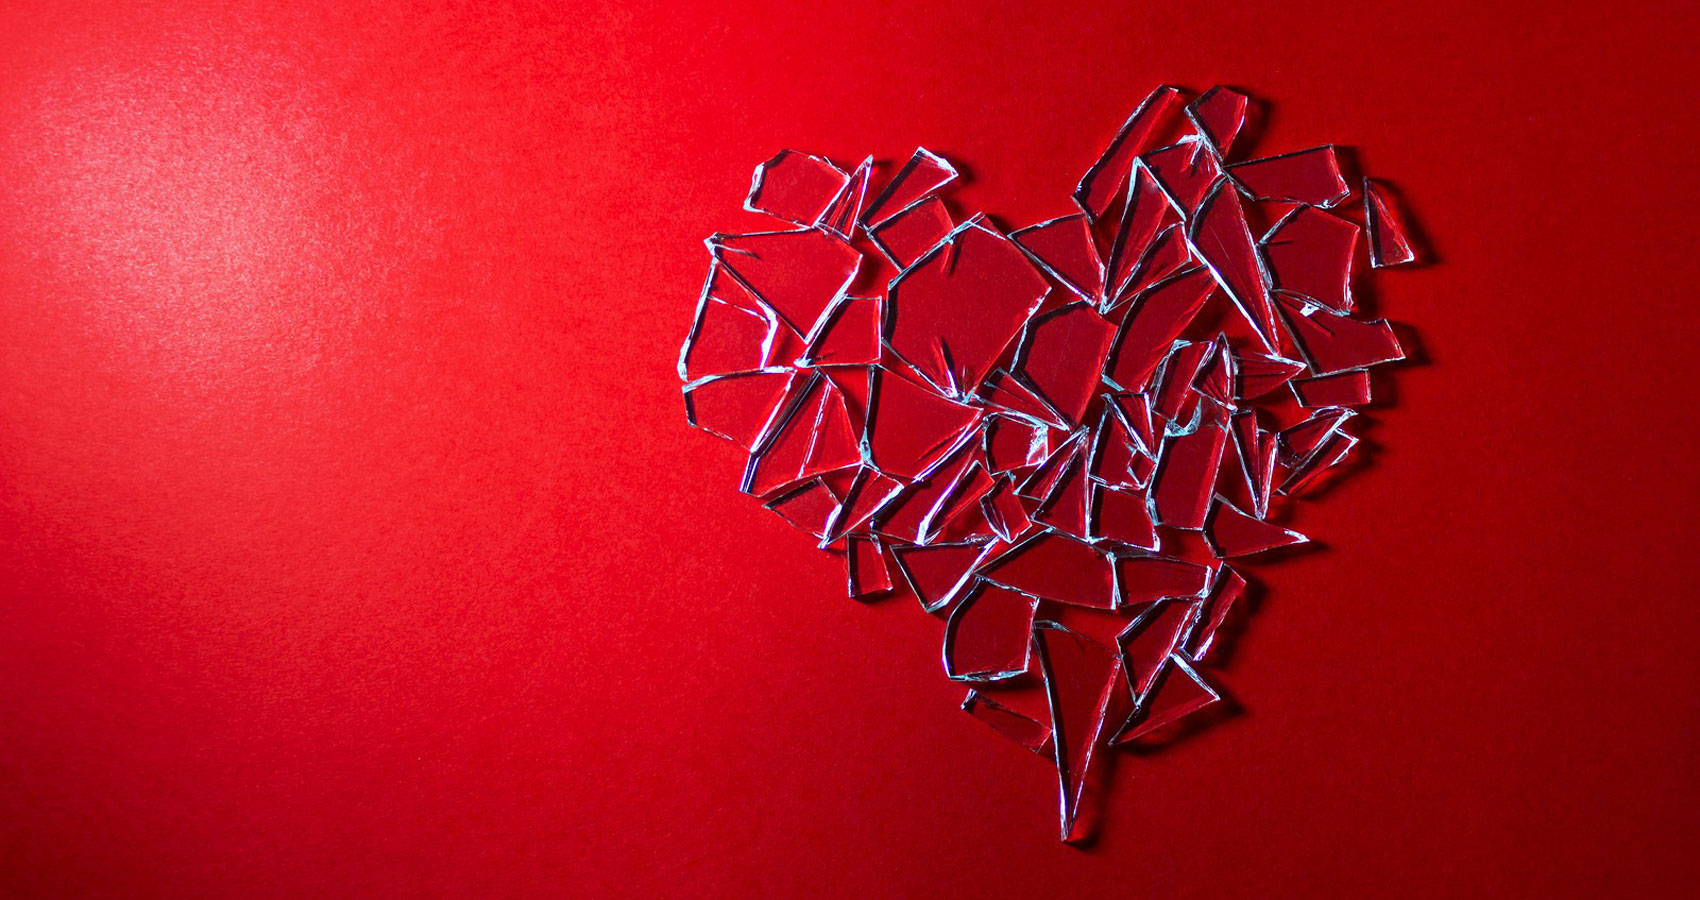 Heart Thief by Leanne Yeoman at Spillwords.com